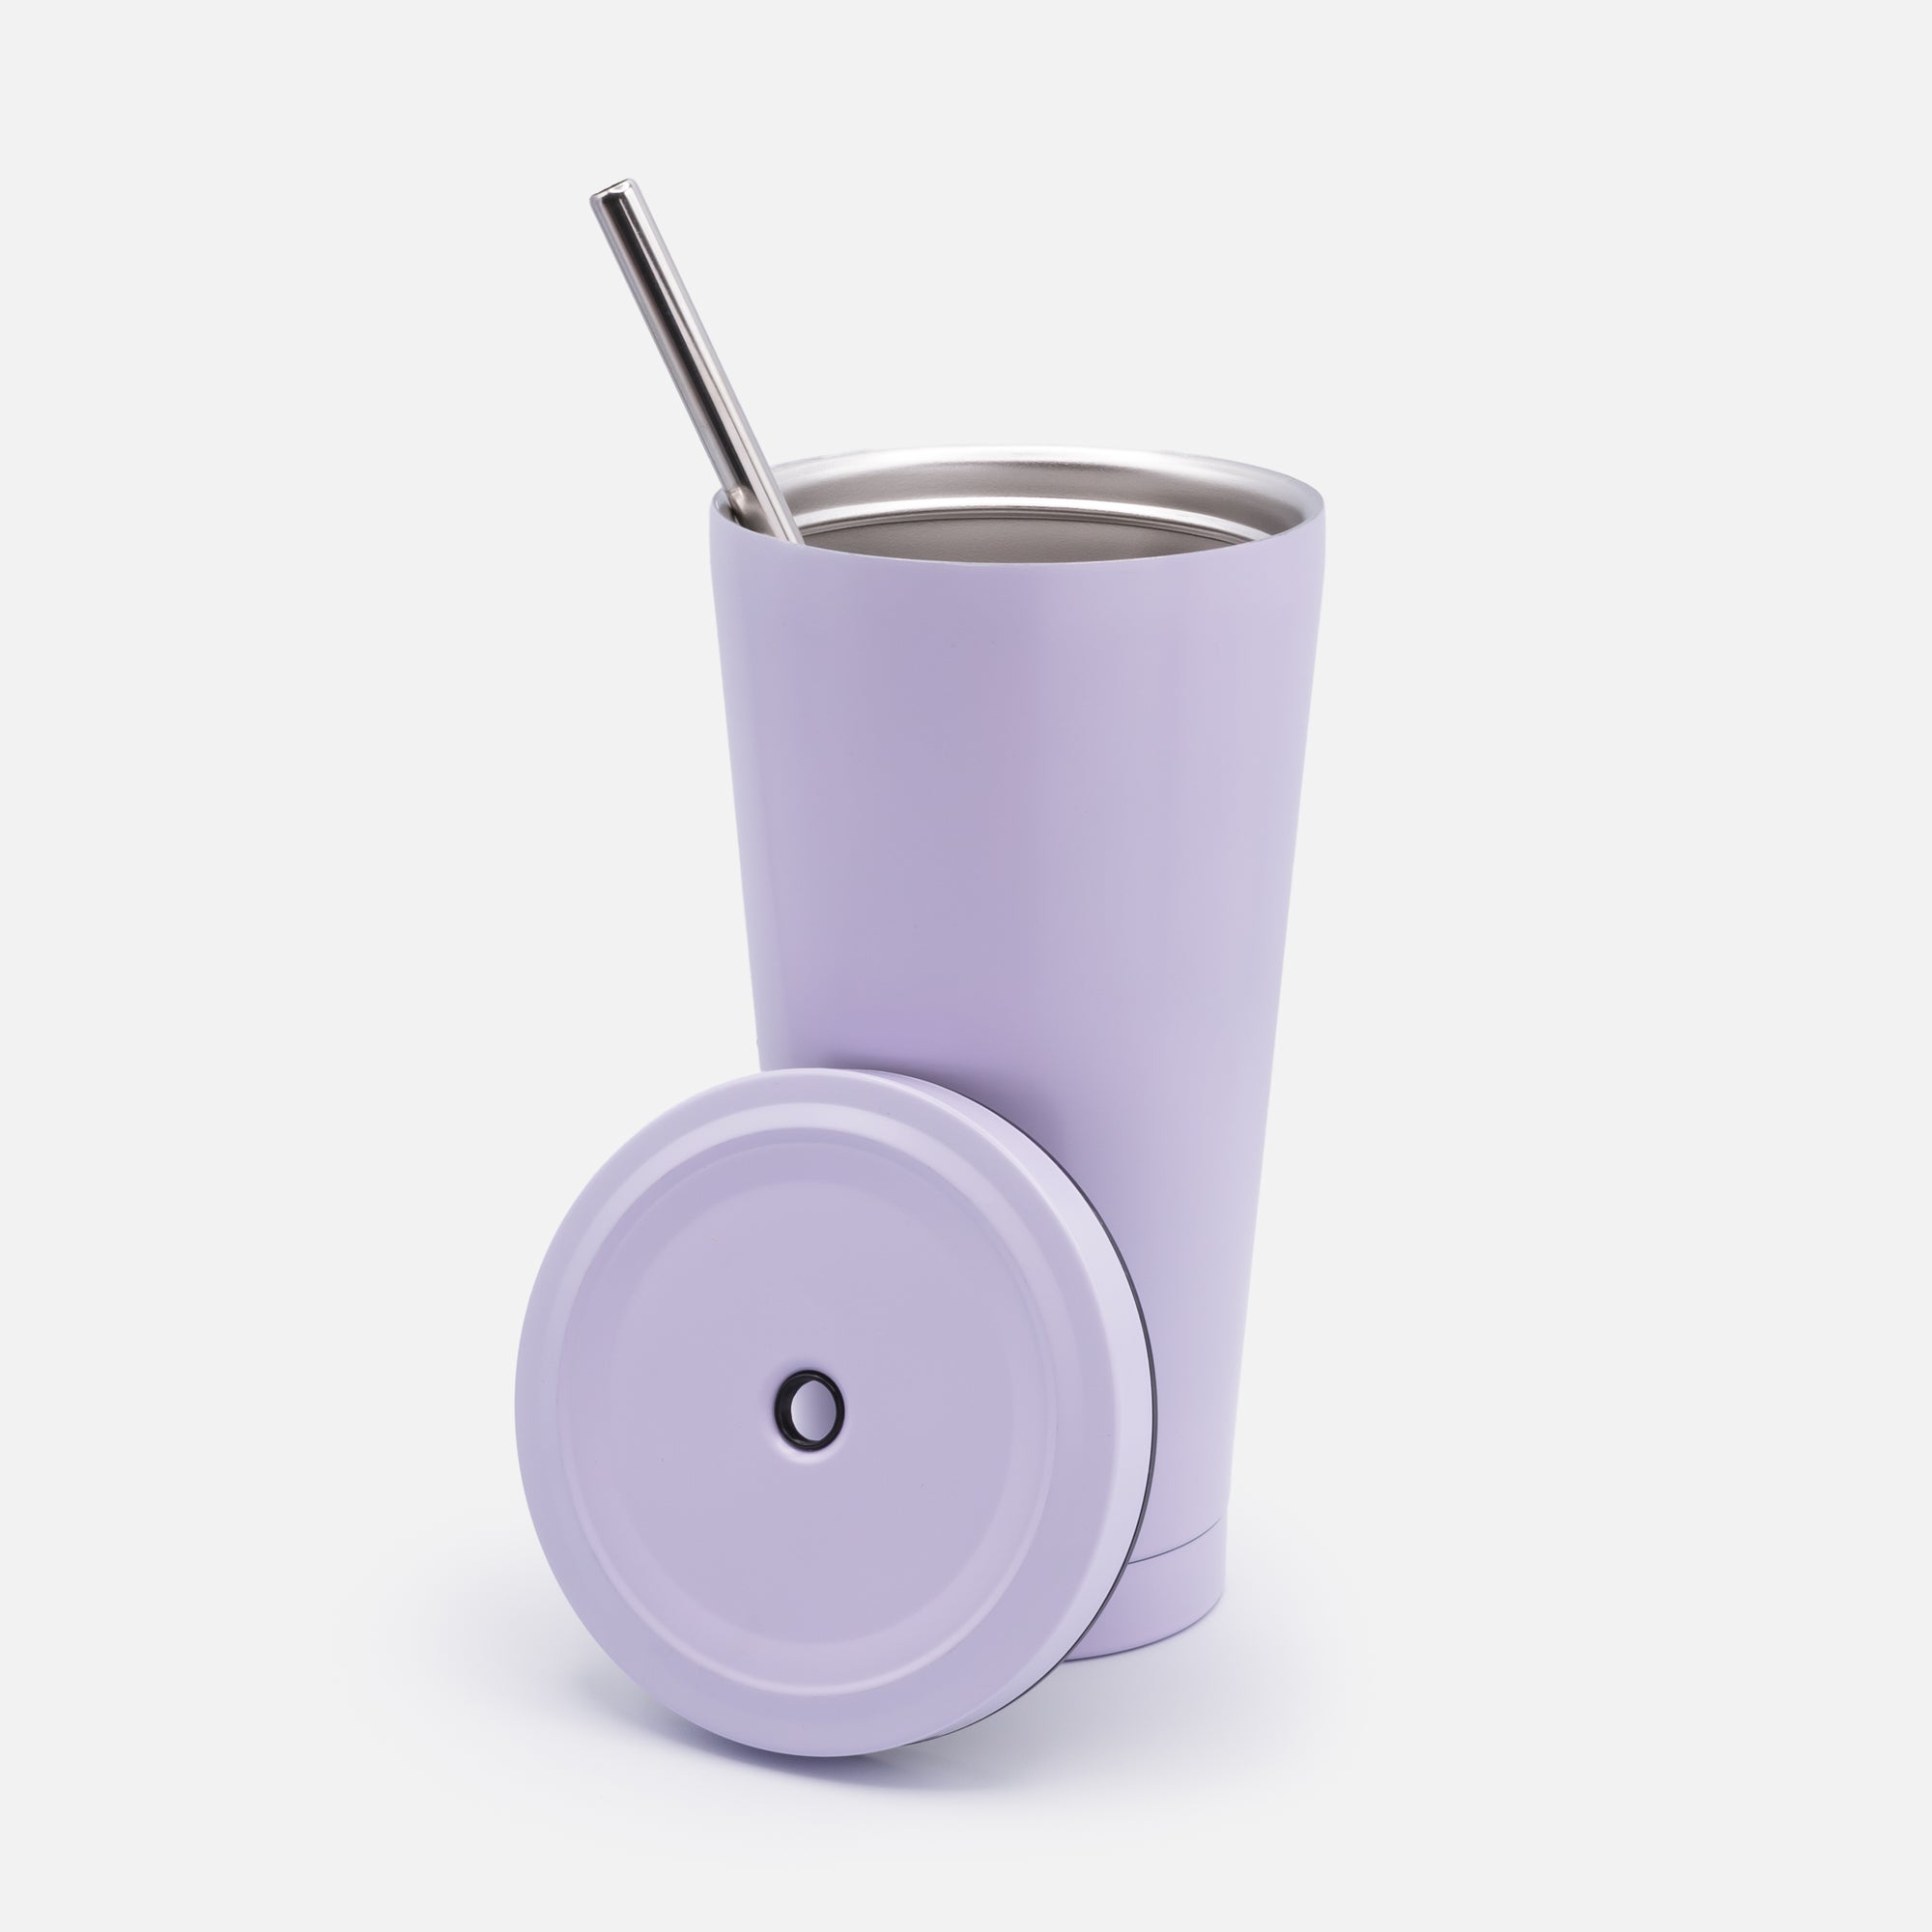 Lilac Travel Mug with Stainless Steel Straw